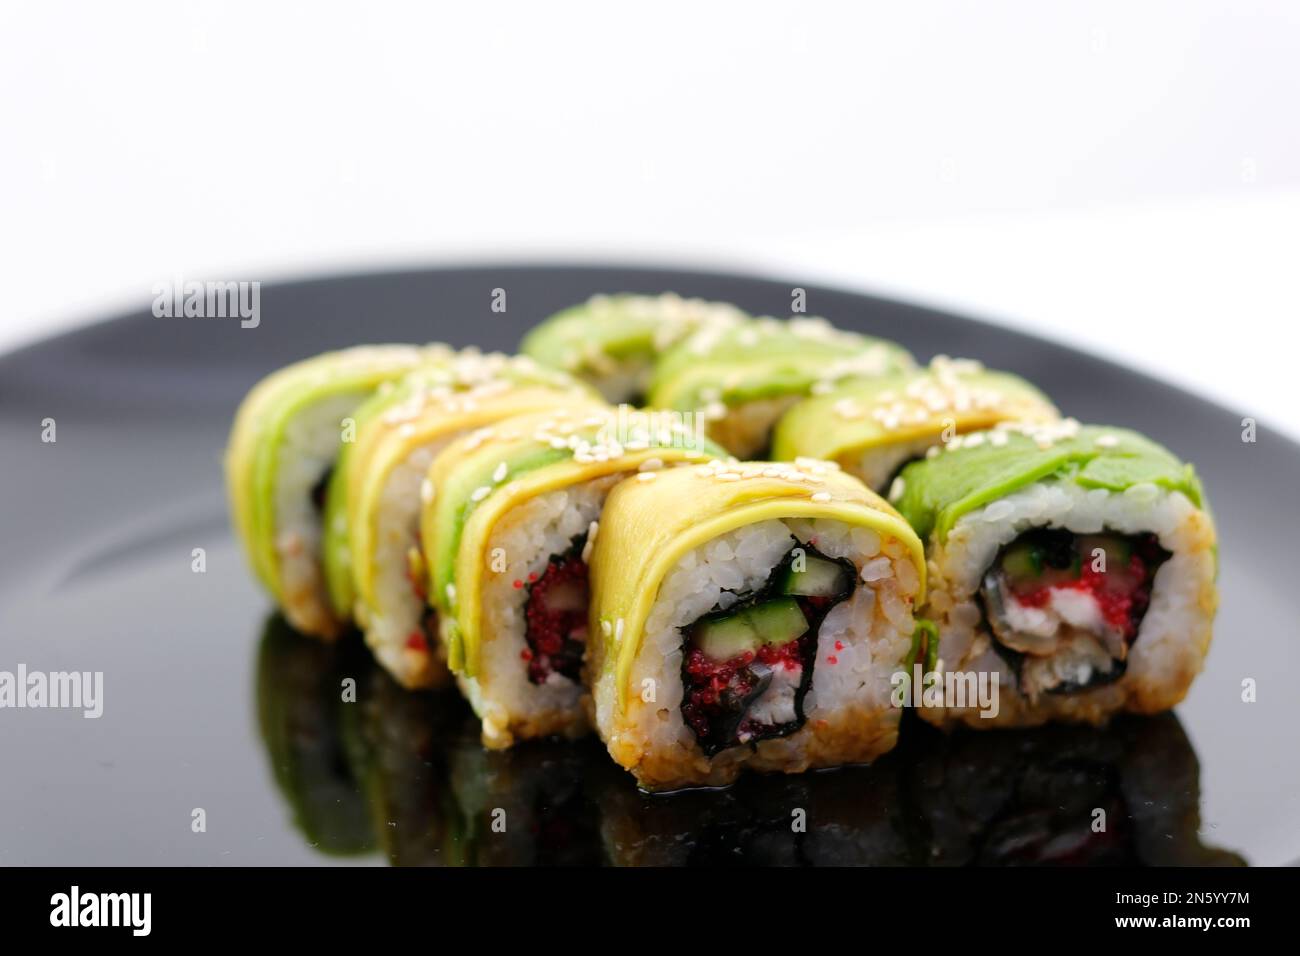 Menu green dragon Japanese rolls with avocado, omelet, sesame and cucumber closeup on a plate on the table. horizontal On a black plate restaurant beautiful serving delicious food japanese chinese Stock Photo